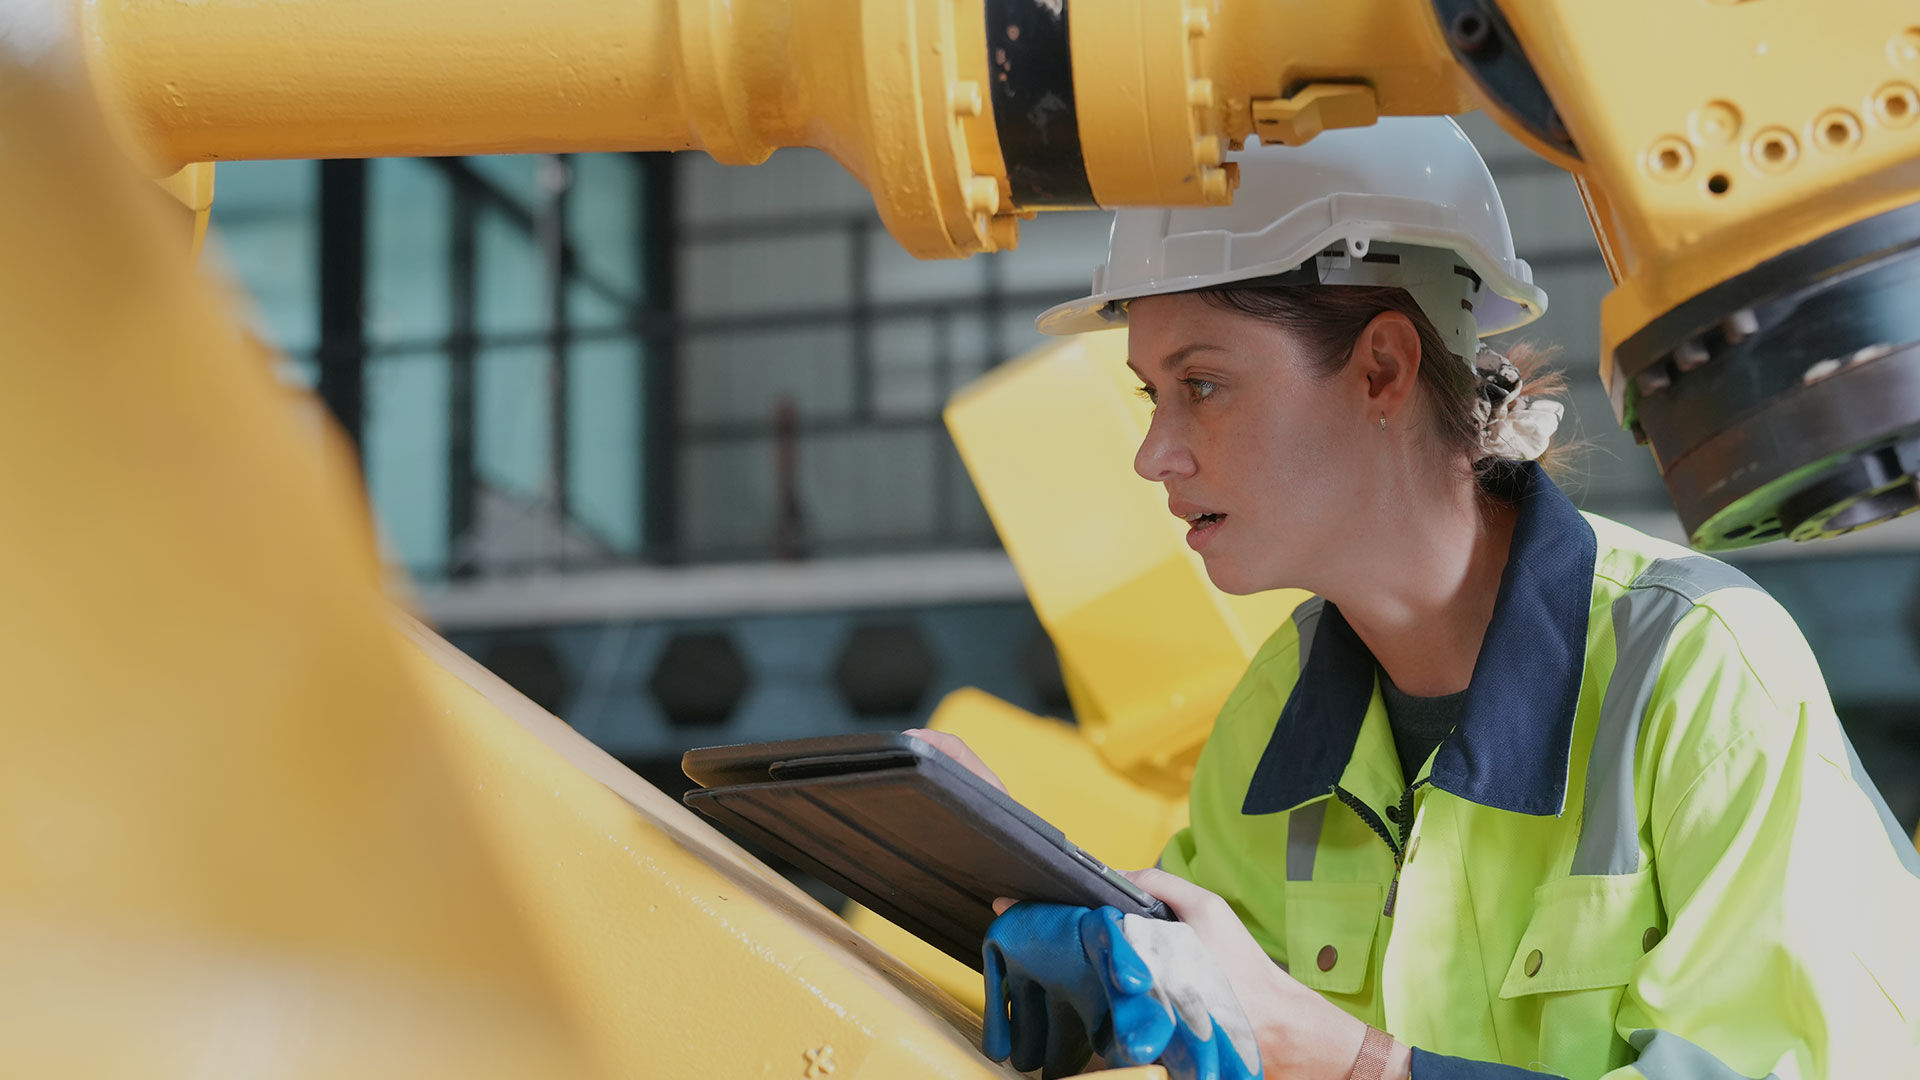 Close up of a woman wearing safety gear and a hardhat inspecting a yellow machine